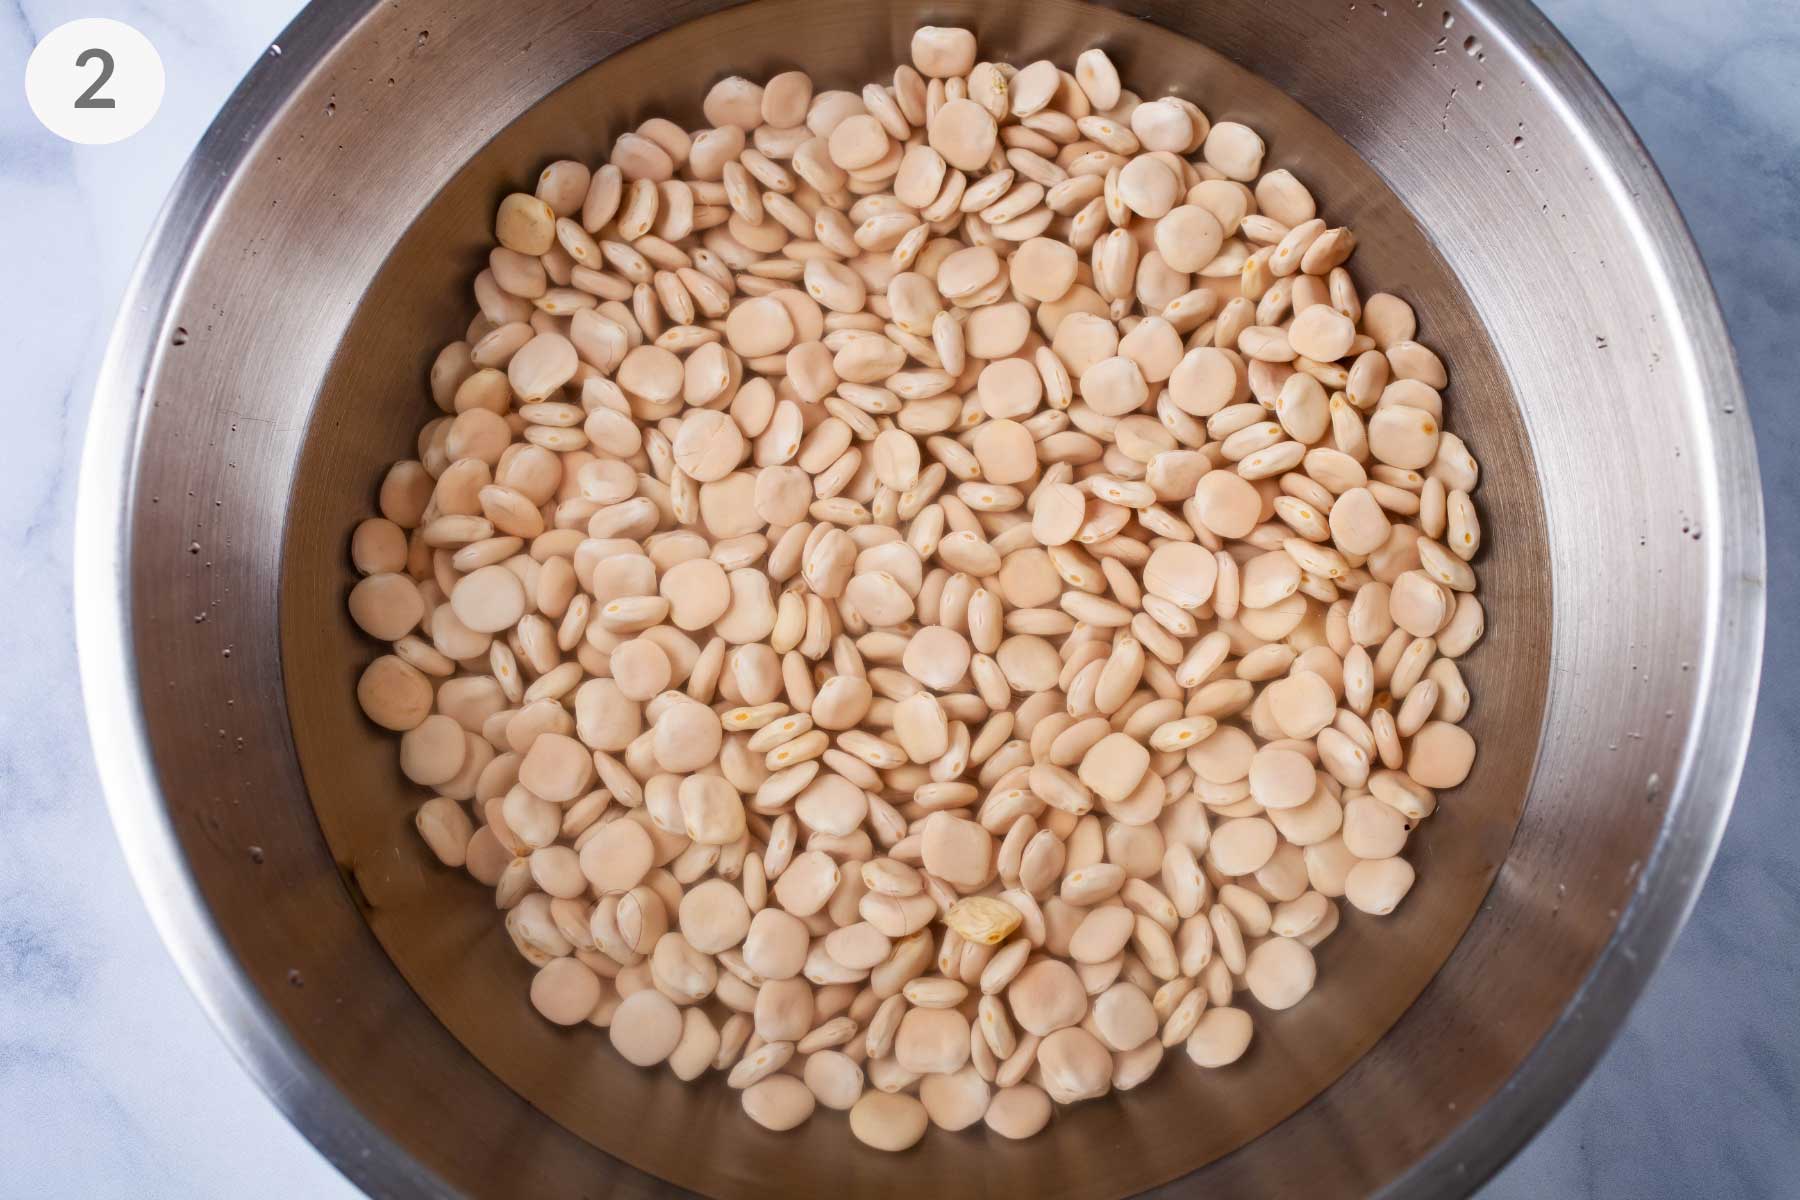 A bowl filled with uncooked Lupini beans submerged in water.